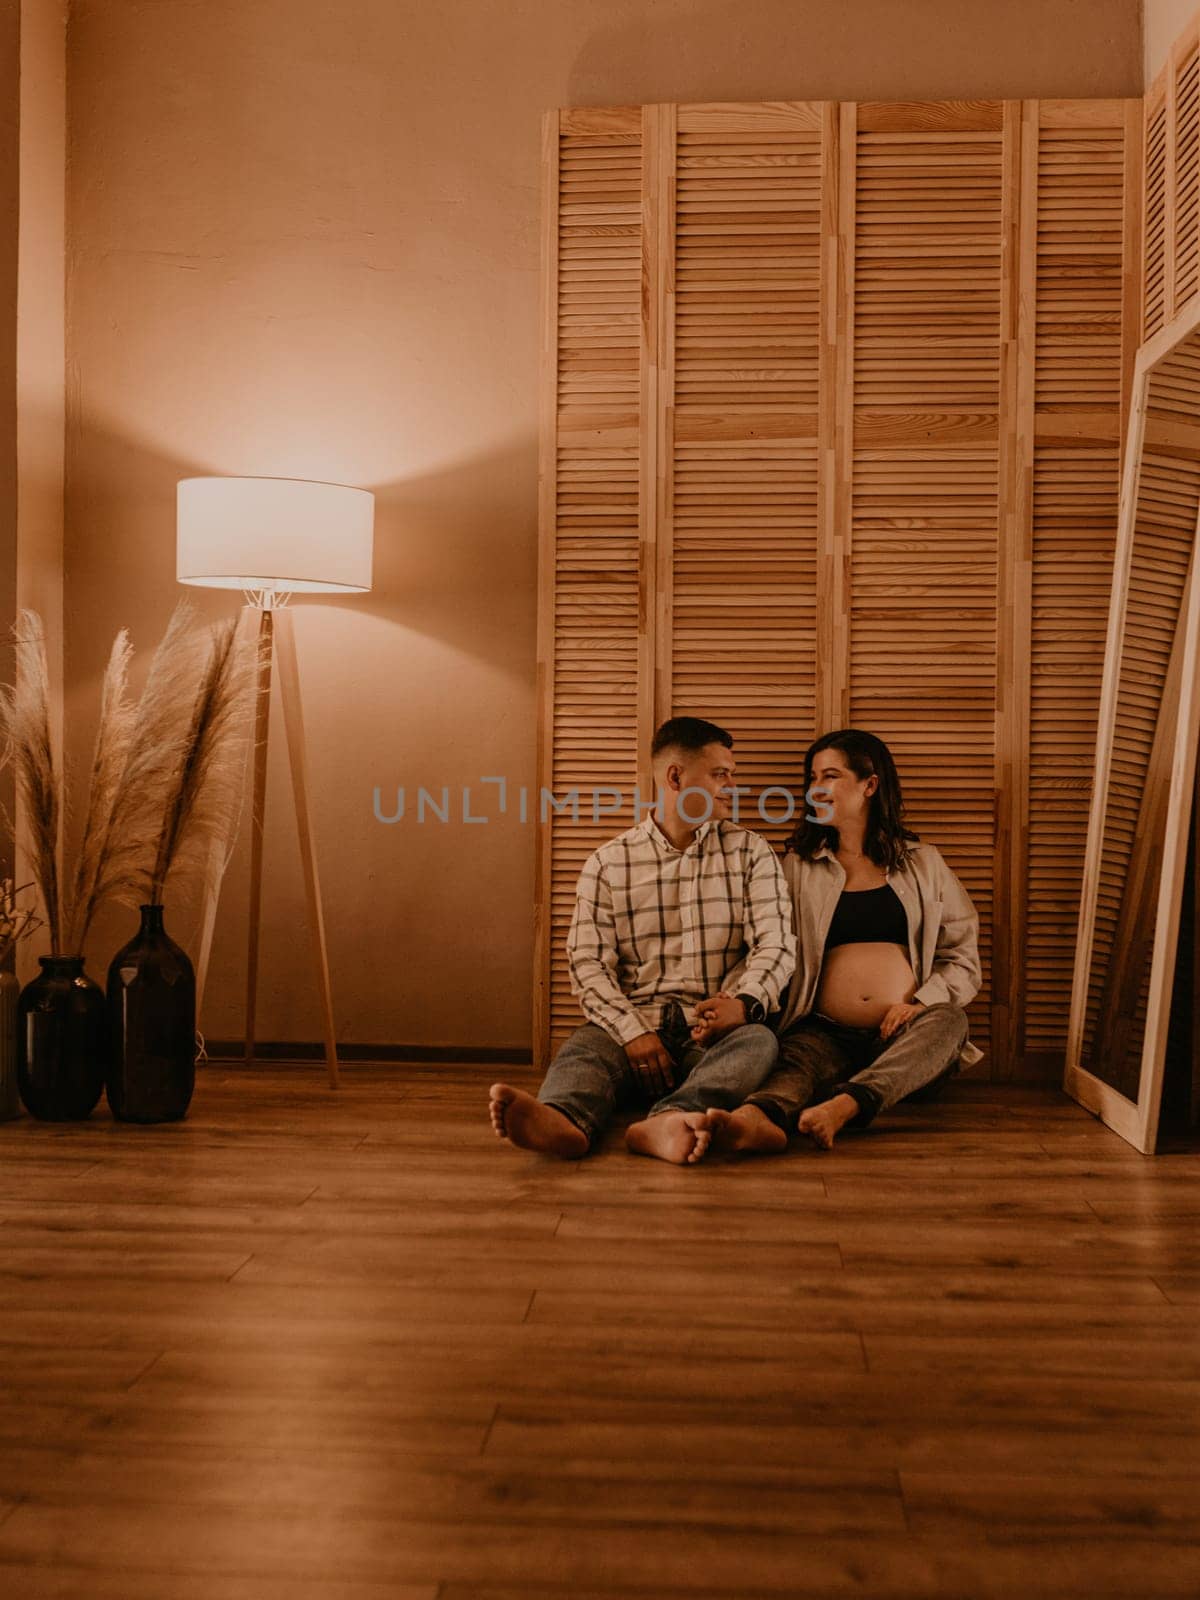 an incredibly beautiful married couple Expecting child, pregnant wife. Happy parenthood, real Ukrainian young family. romantic, gentle, stylish photo session of married couple. pregnant woman in love